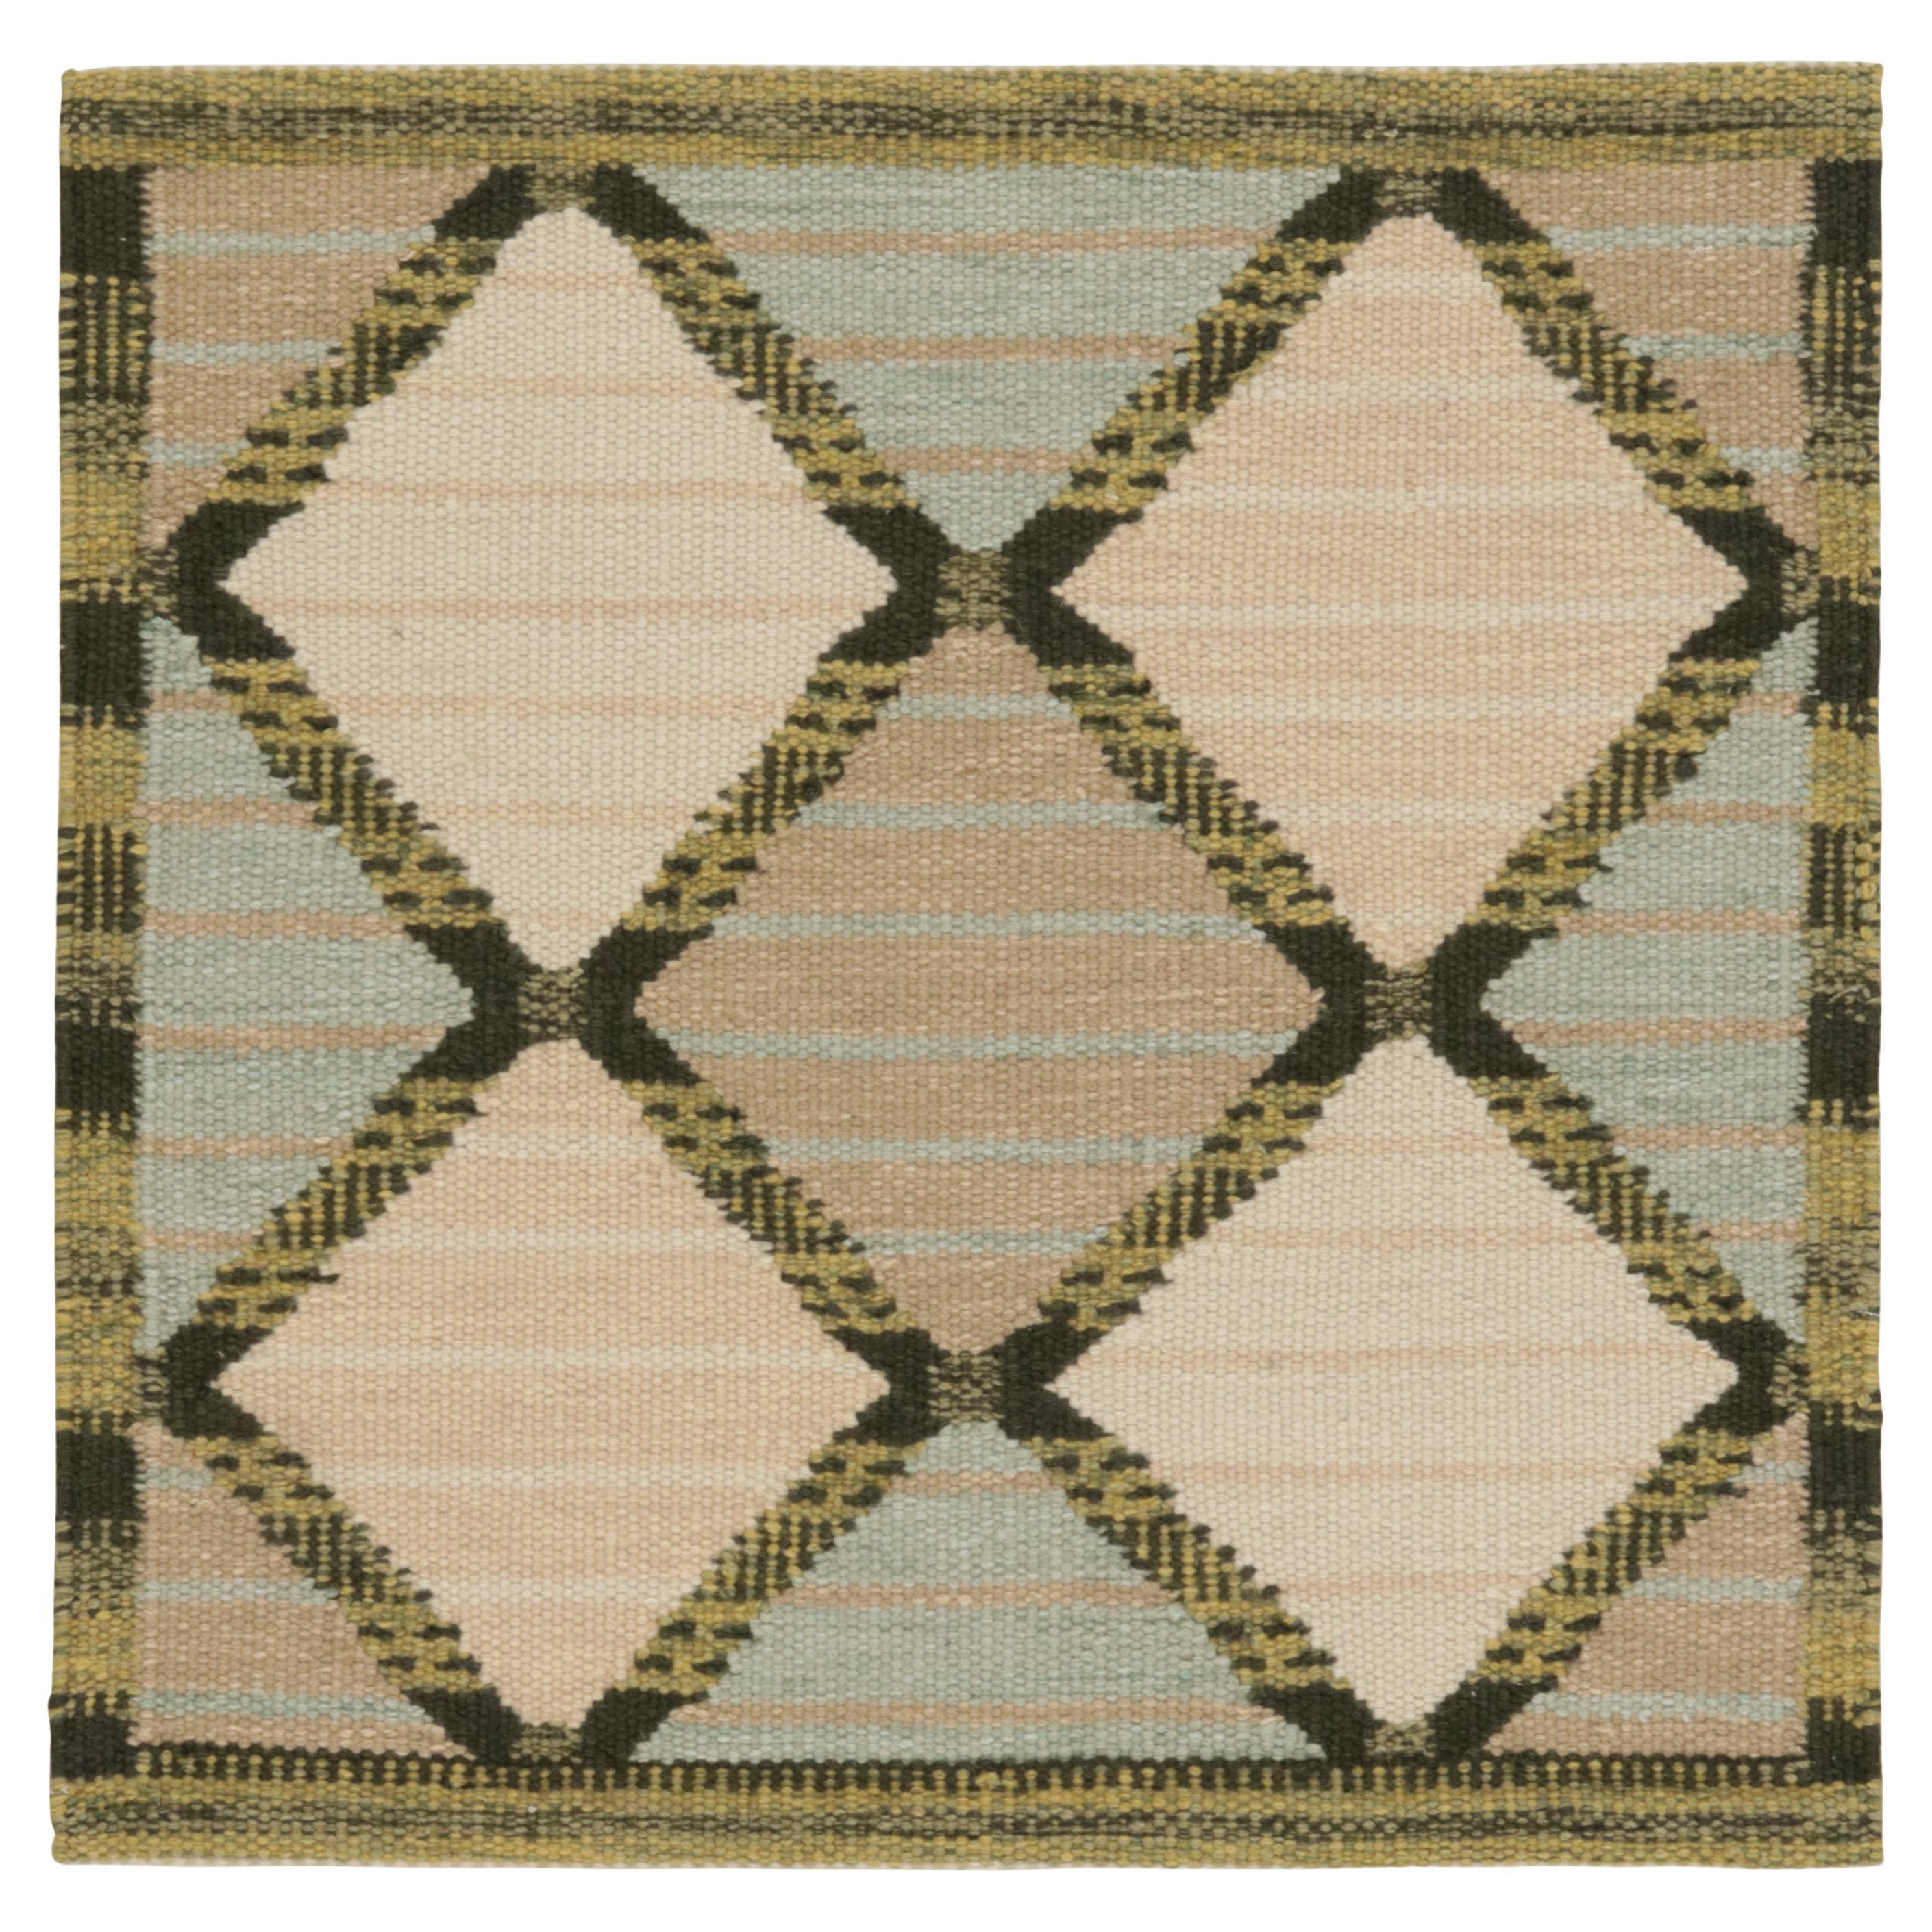 Rug & Kilim’s Scandinavian Style Square Rug in Blue and Beige, with Patterns